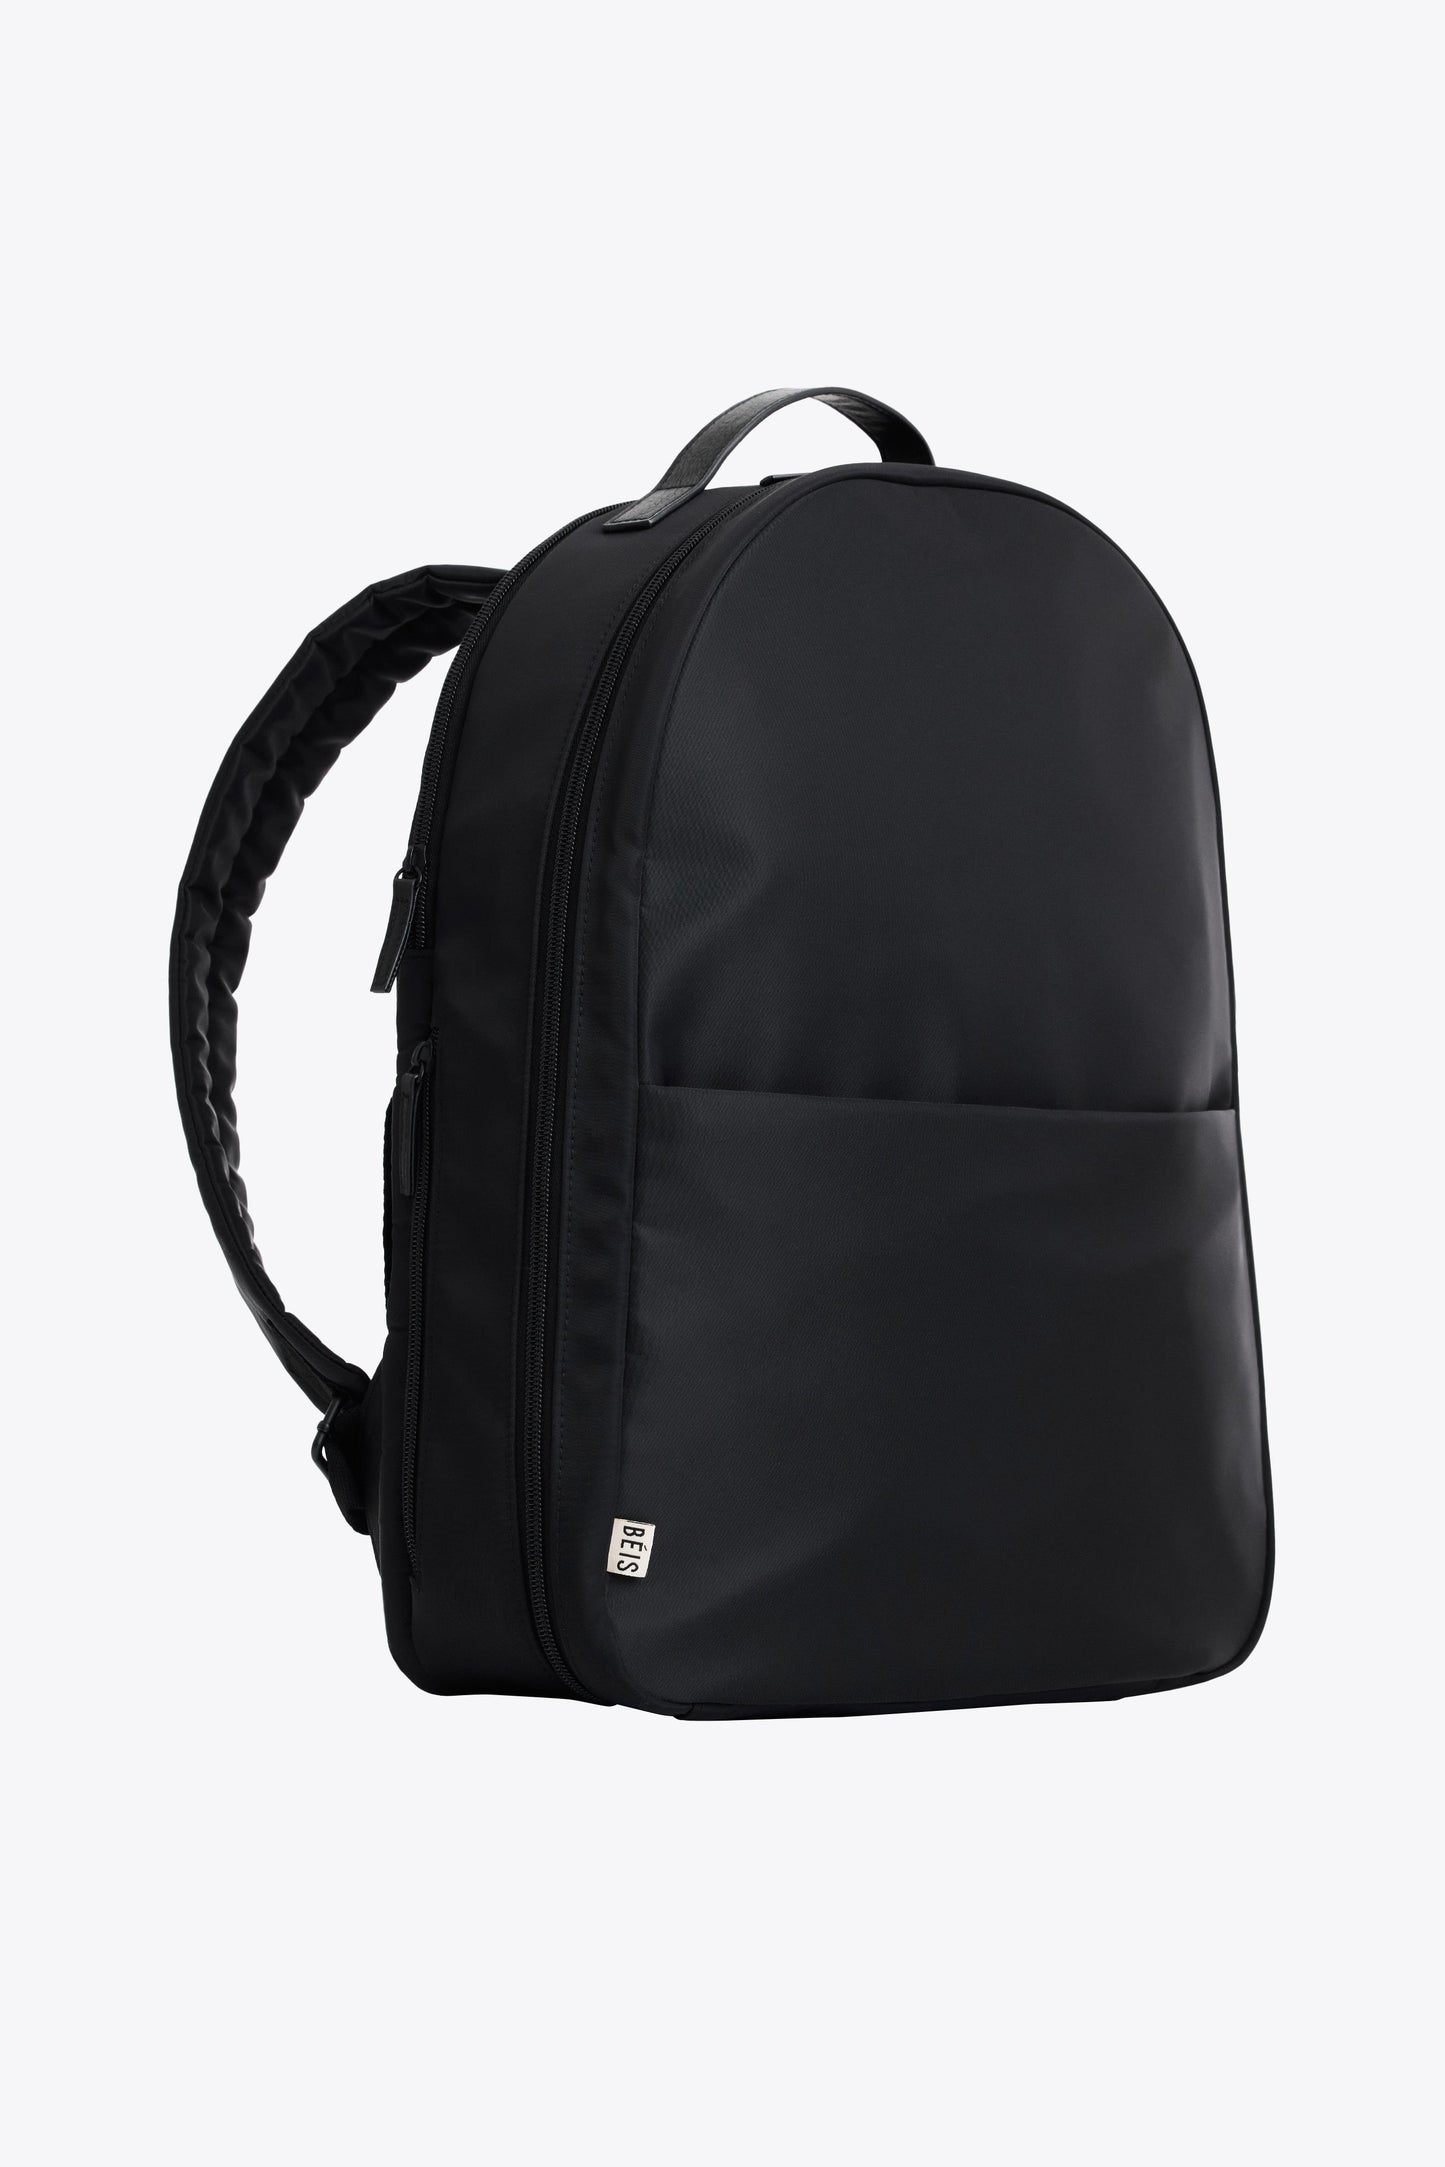 The Commuter Backpack In Black